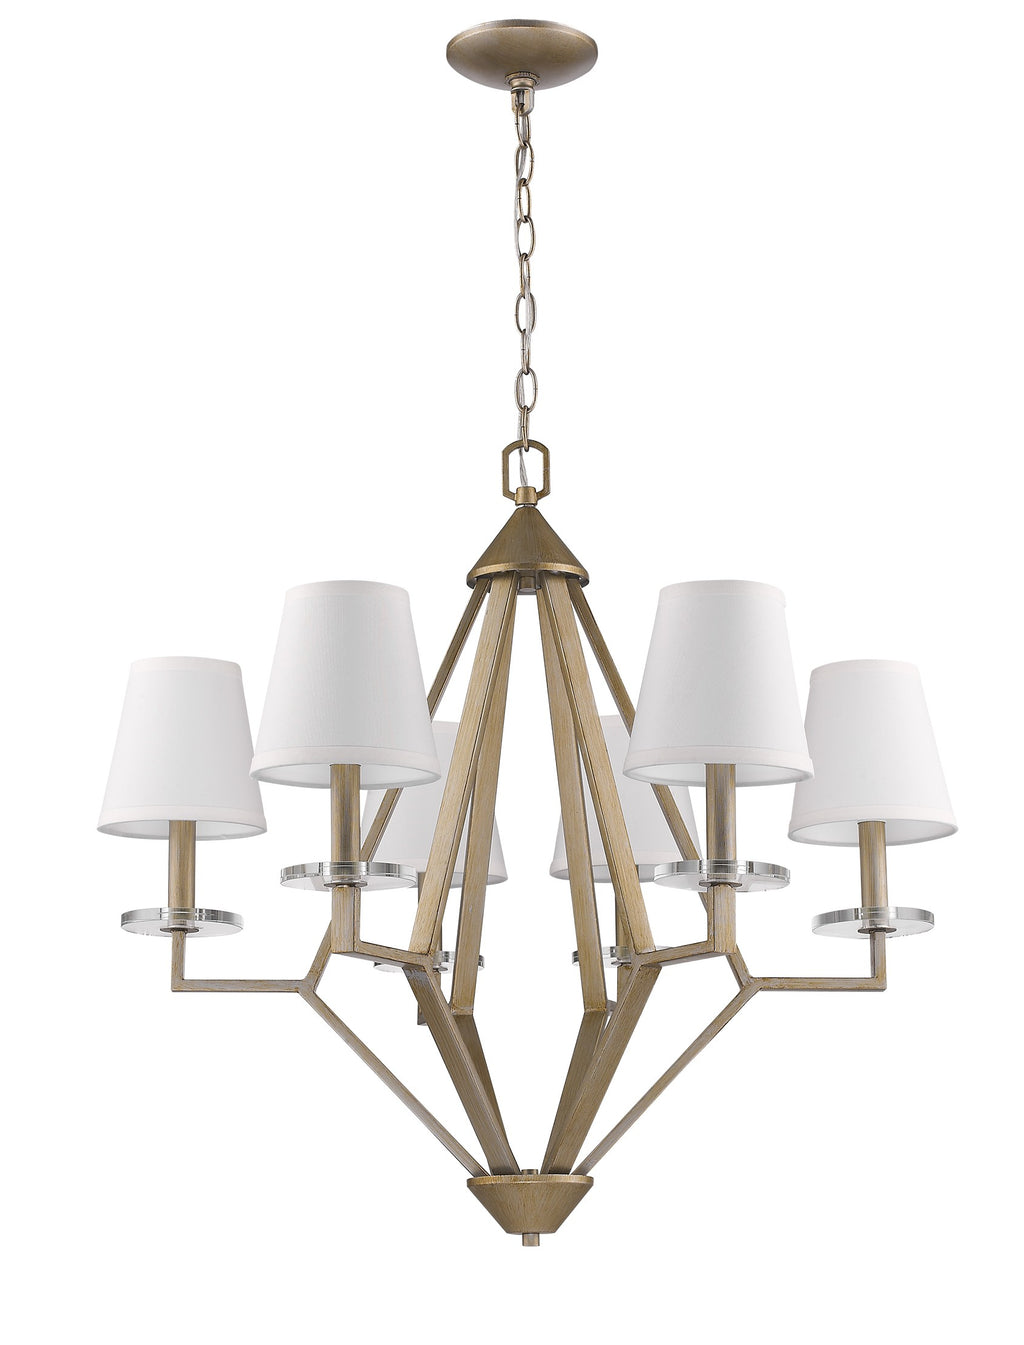 Easton 6-Light Washed Gold Chandelier With Crystal Bobeches And White Fabric Shades - 99fab 